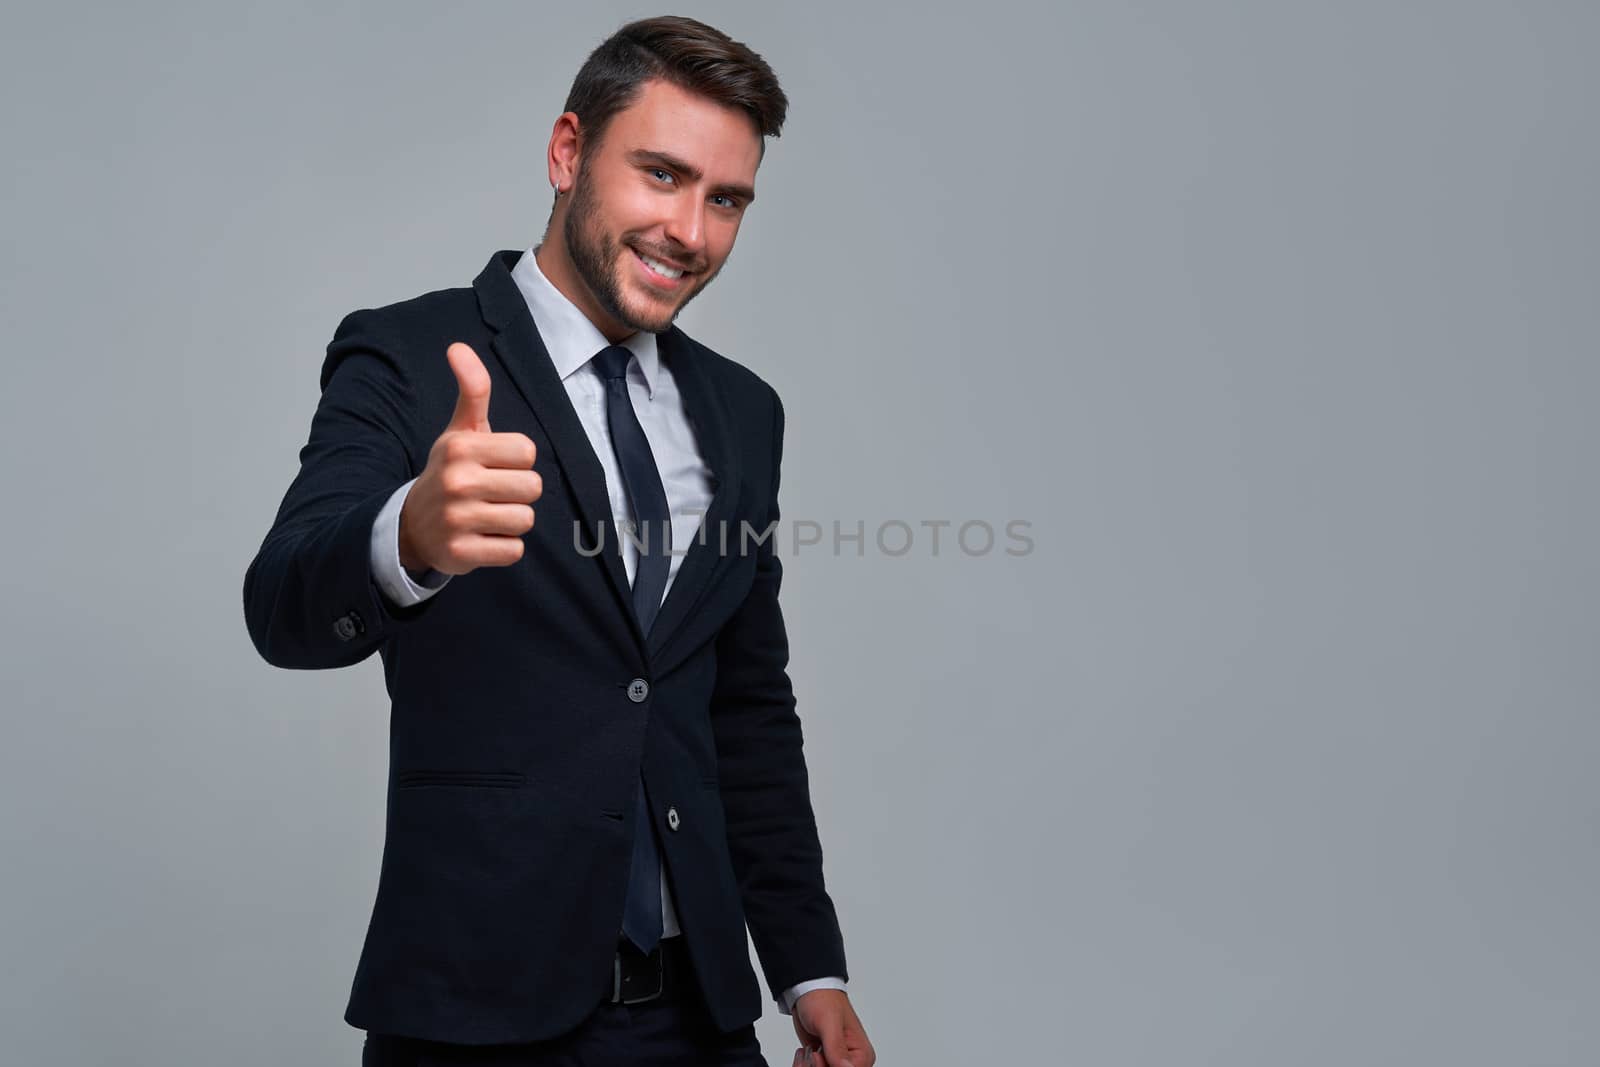 Portrait young smiling businessman. Caucasian guy business suit tie studio gray background. Modern business person Showing thumbs up sign. Portrait of charming successful happy entrepreneur